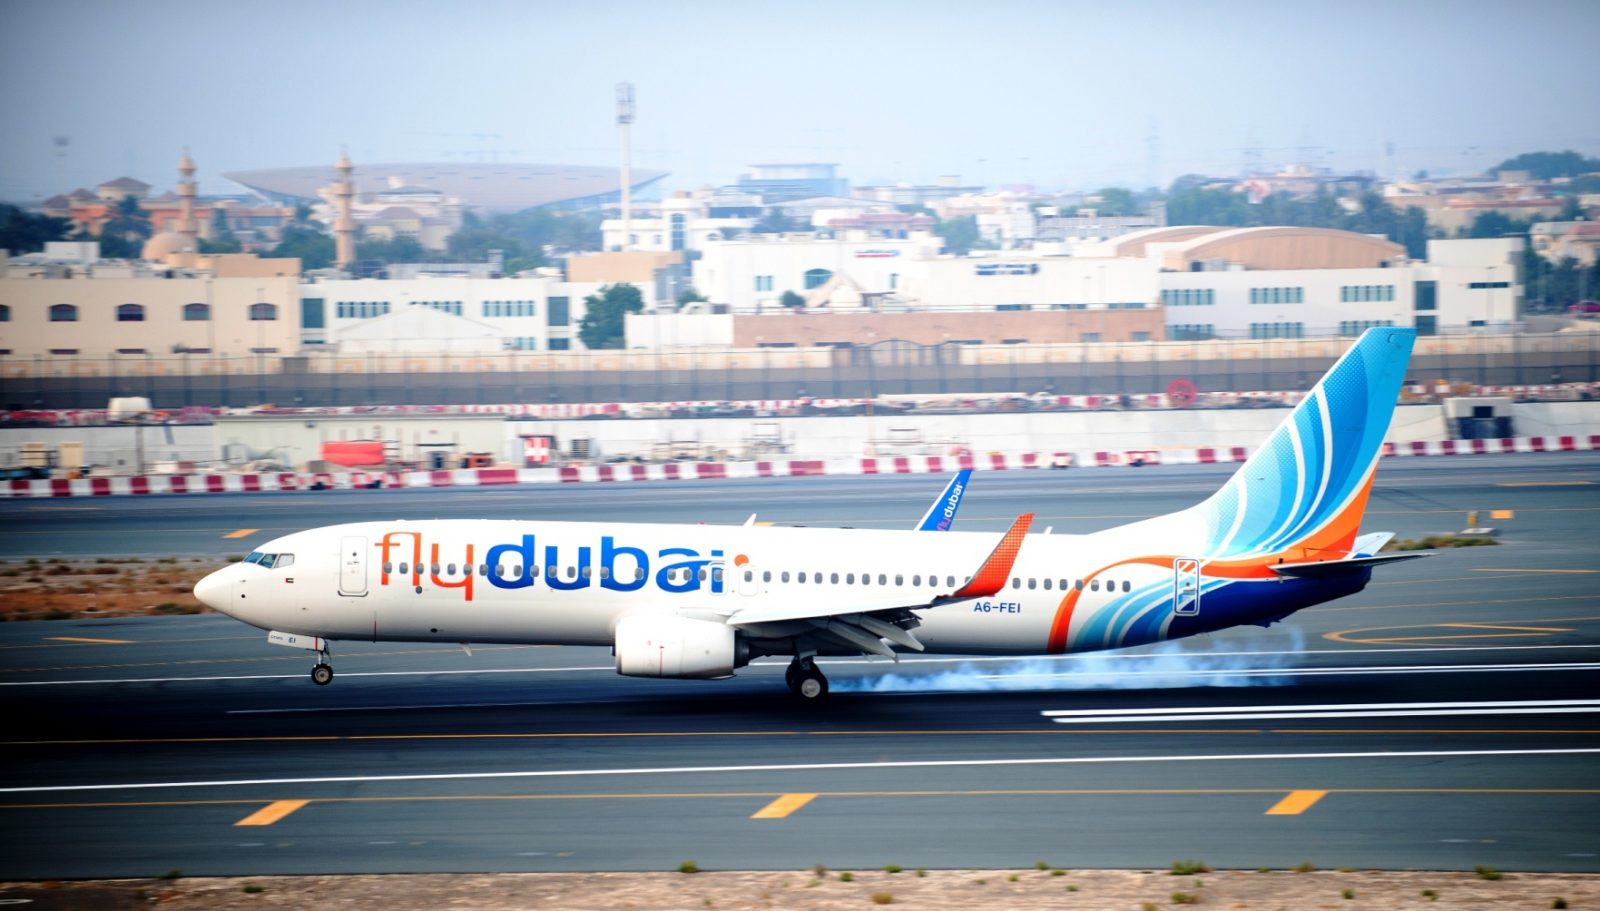 SECURITY INCIDENT: Was There An Attempted Hijacking On a flydubai Plane Today? The UAE Say's No